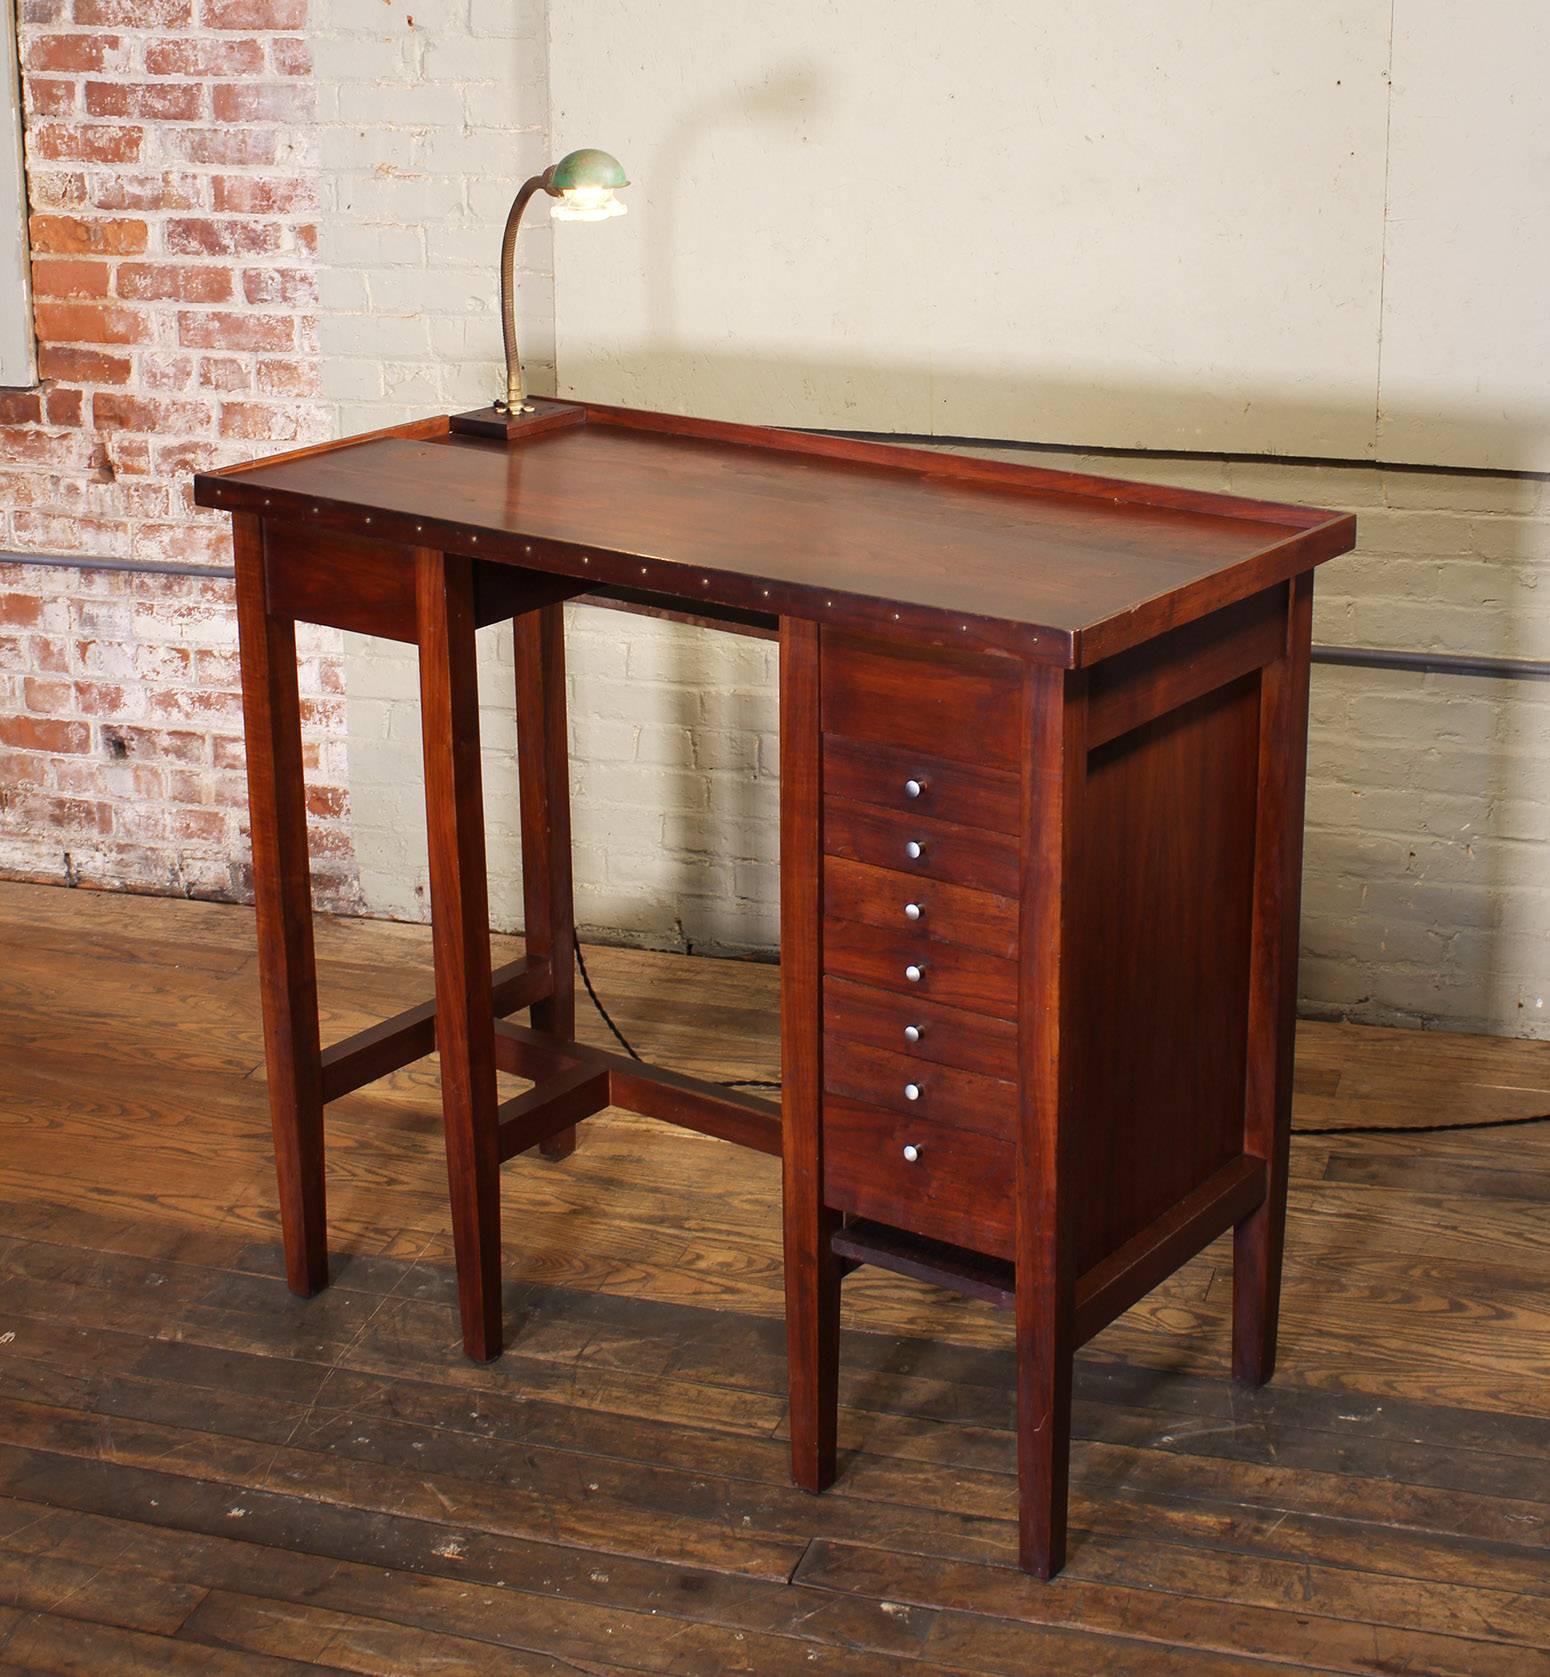 Vintage industrial jewelers work table, workbench with desk light. Features seven drawers, a split level top, two small storage cubby holes, one under the top center, and one under the drawers. Bench measures 45 5/8